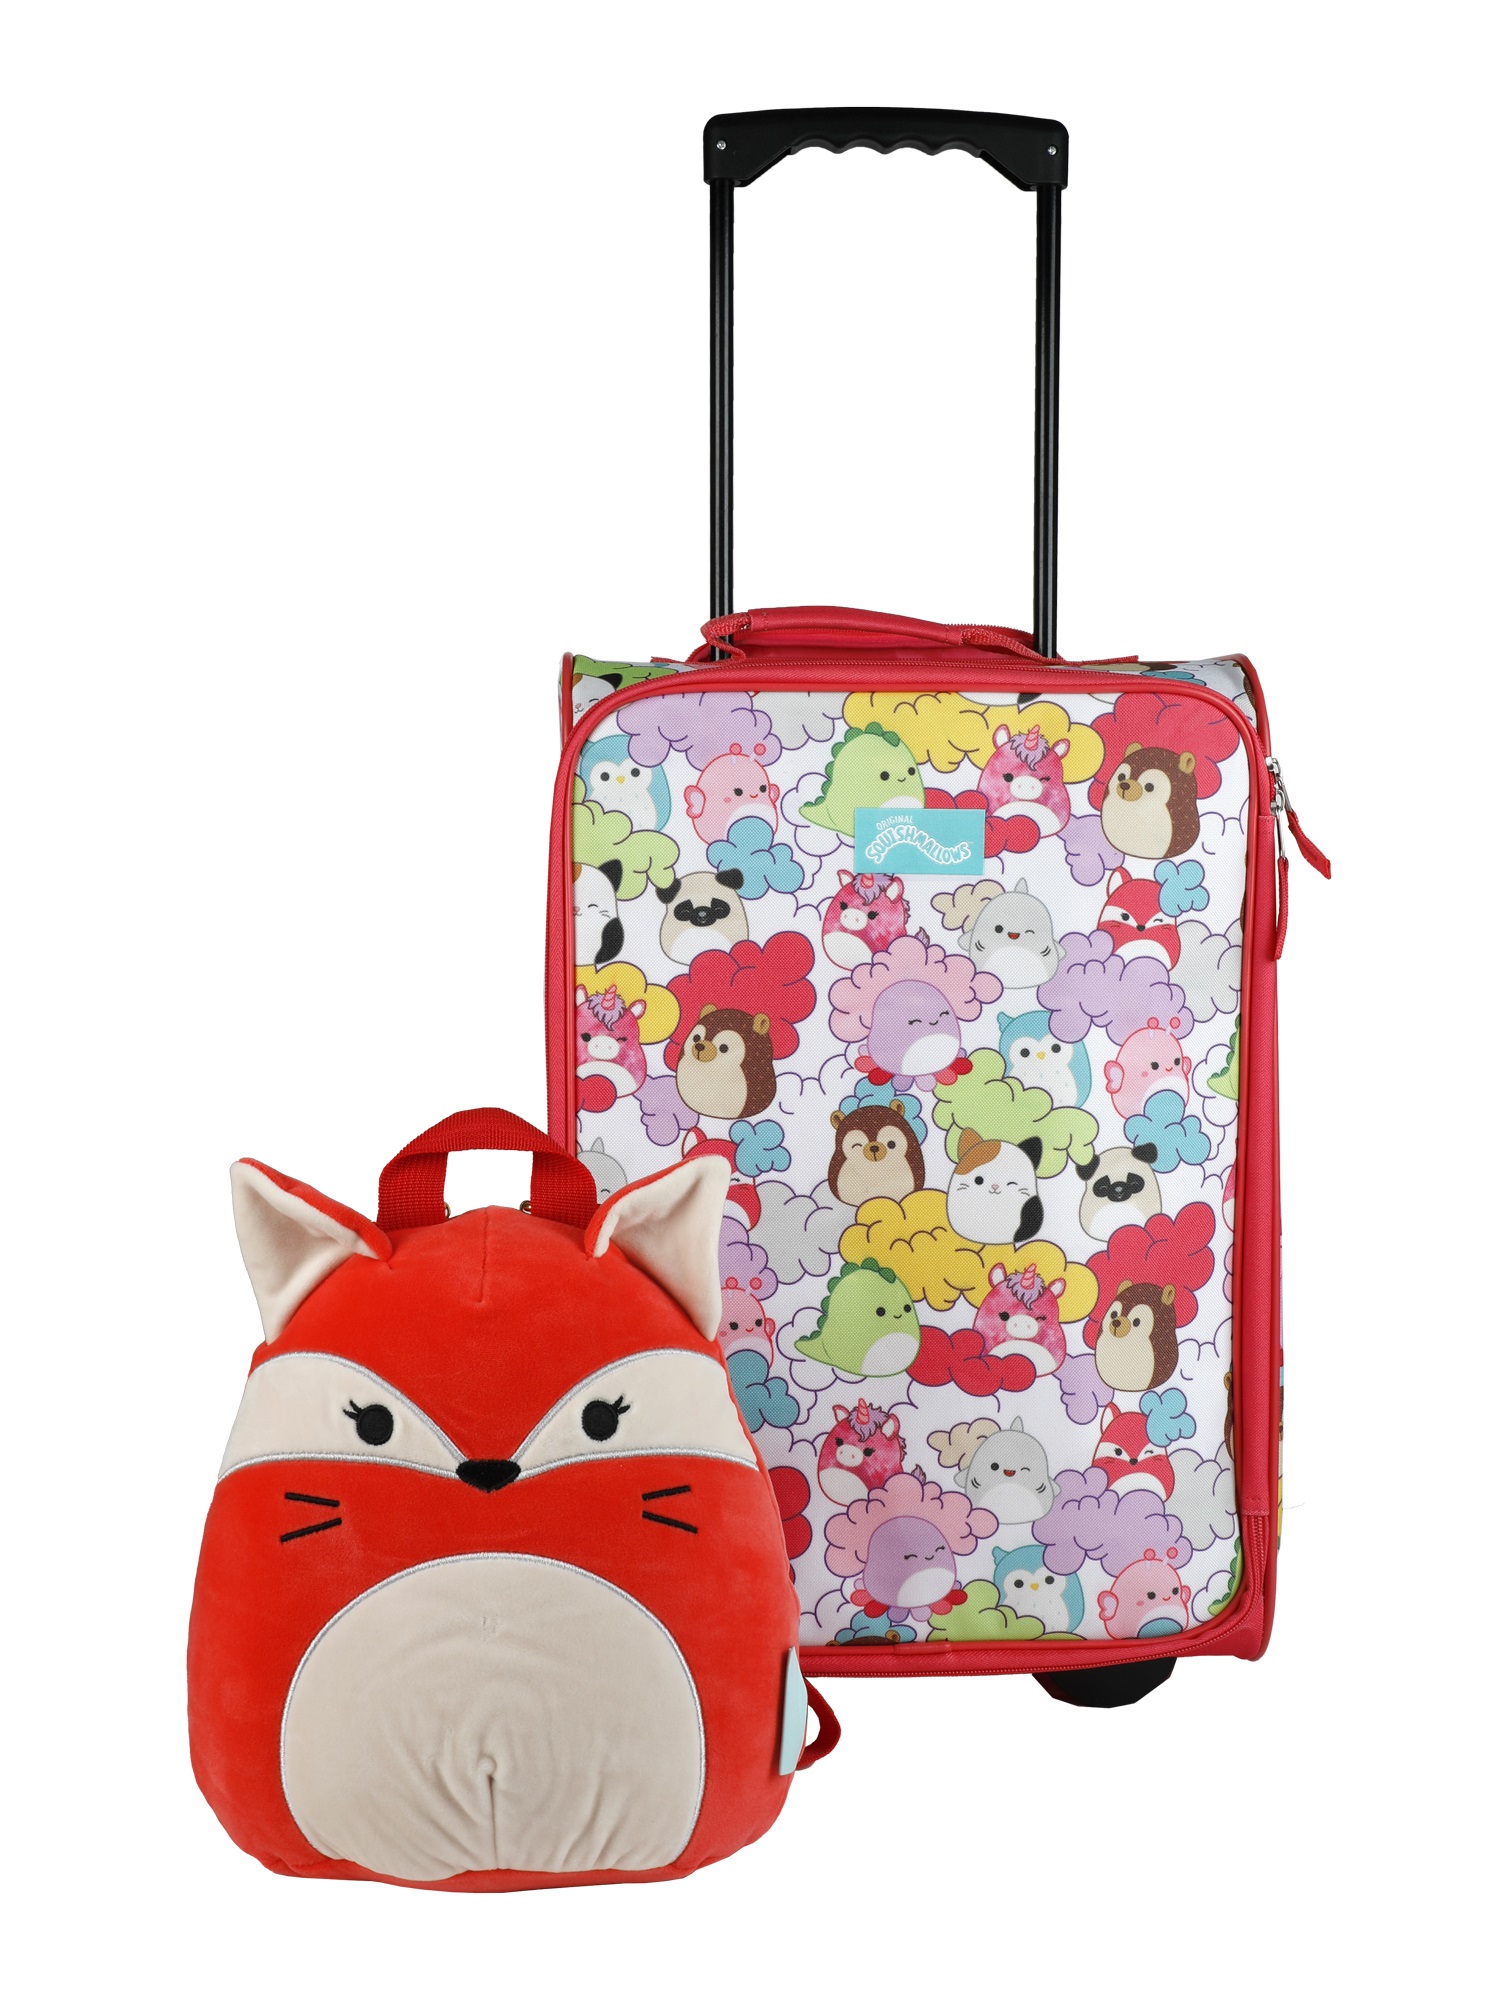 Squishmallows Fifi Fox 2pc  Travel Set with 18" Luggage and 10" Plush Backpack - image 1 of 9